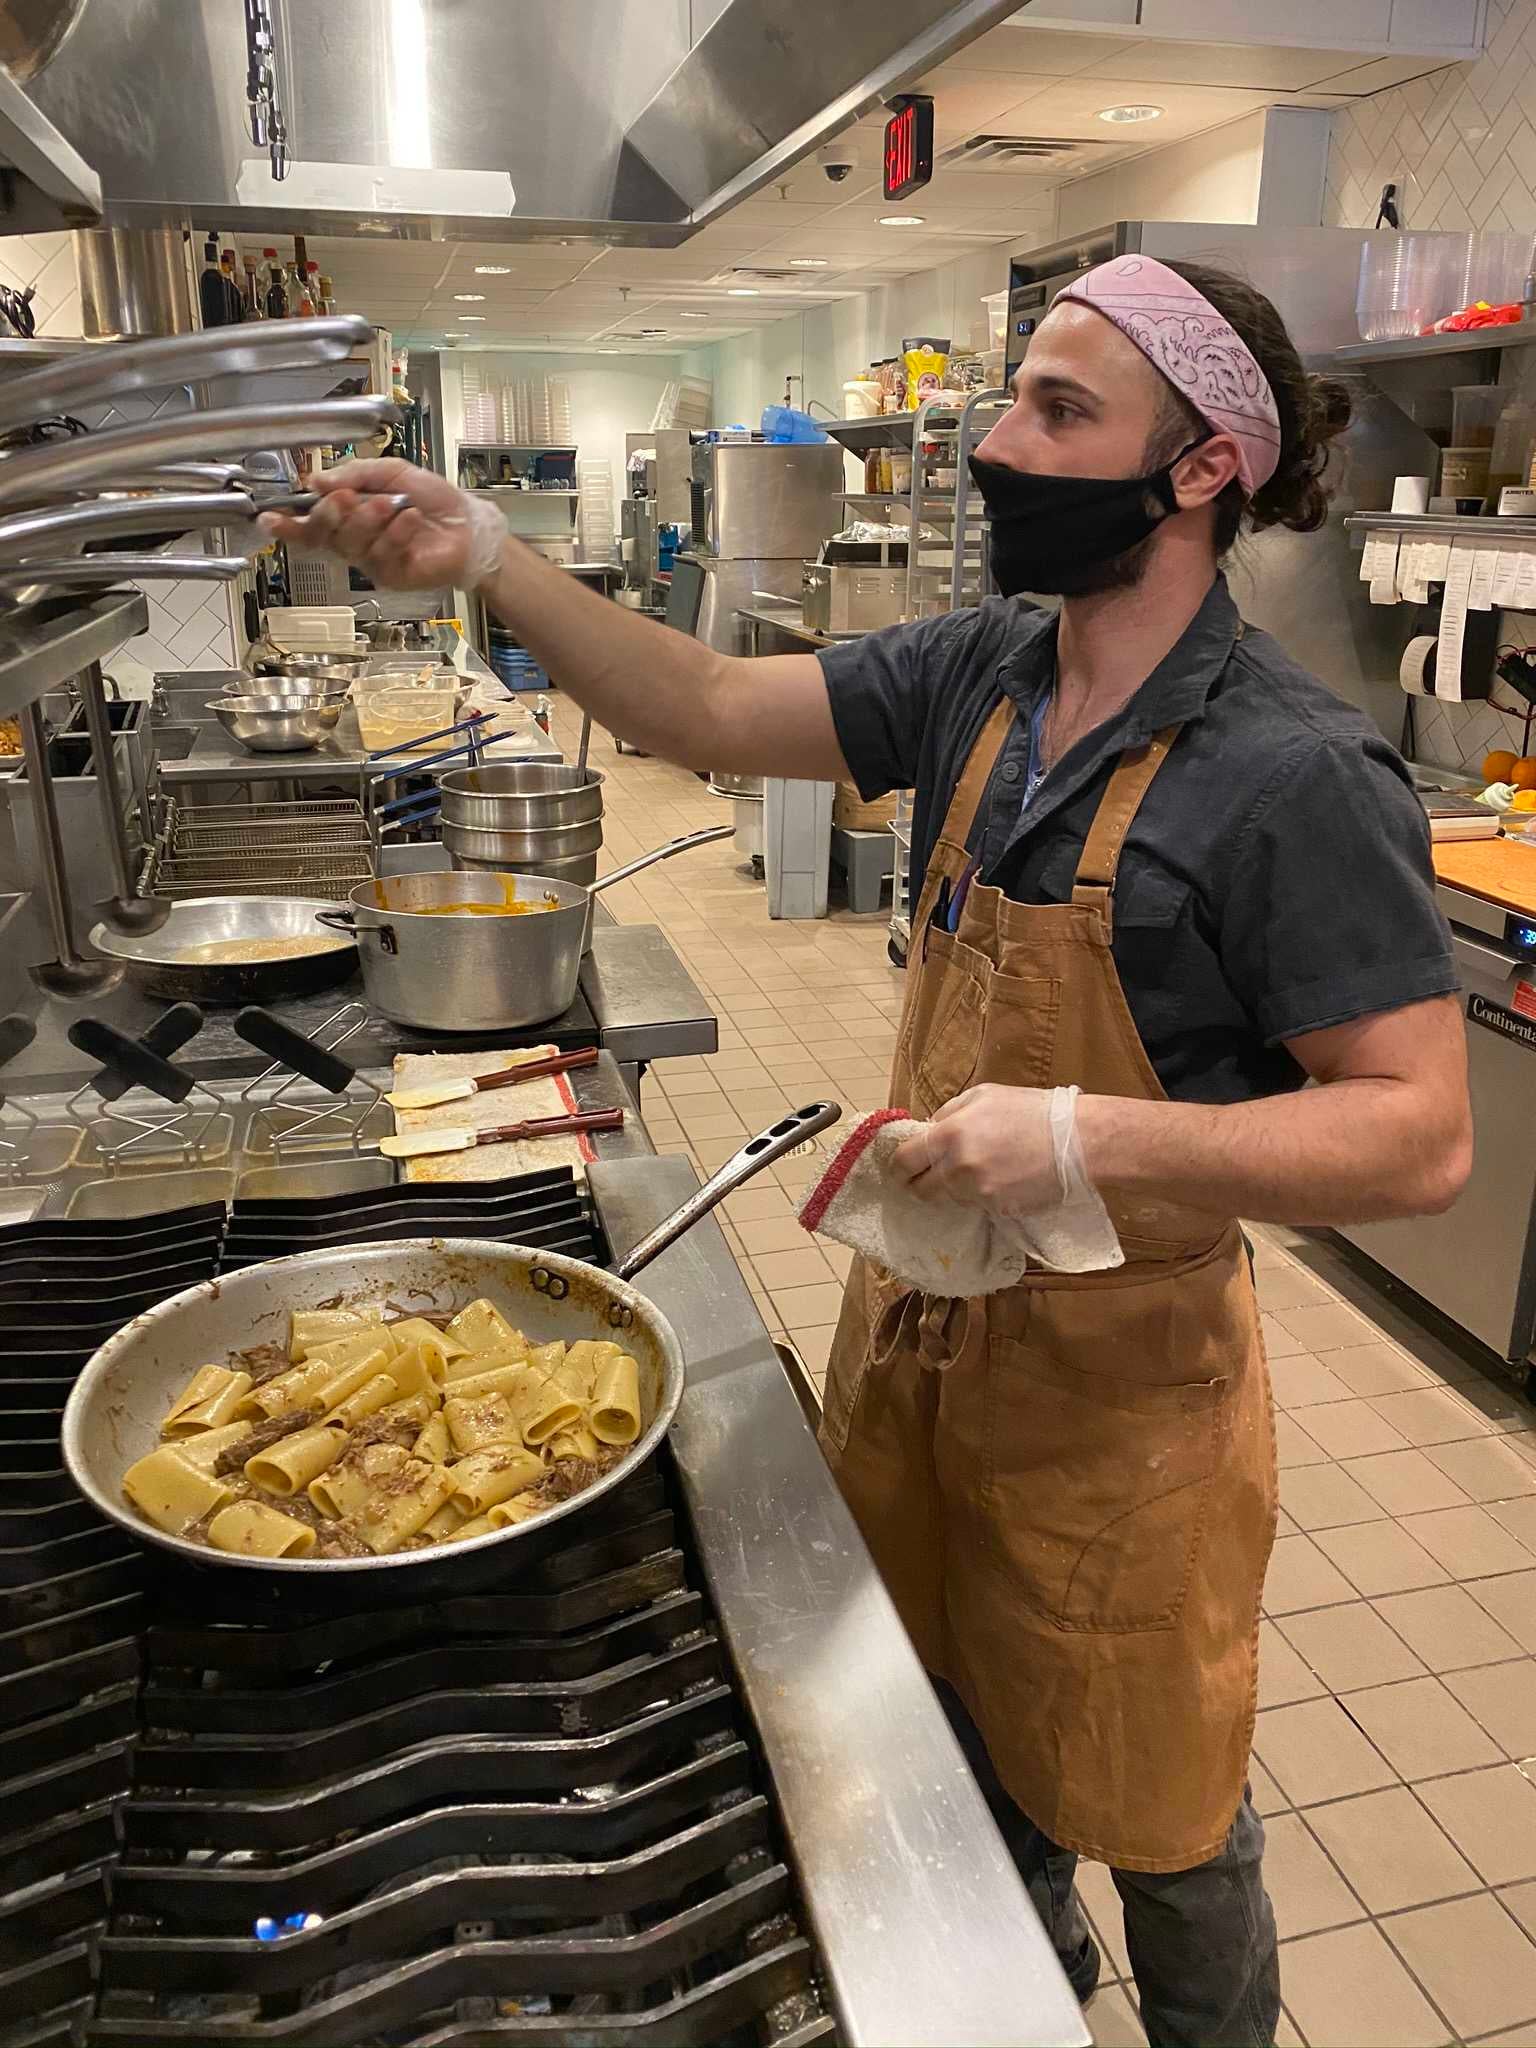 Mask-wearing chefs learn new tricks to cook with limited sense of smell and taste - WHYY